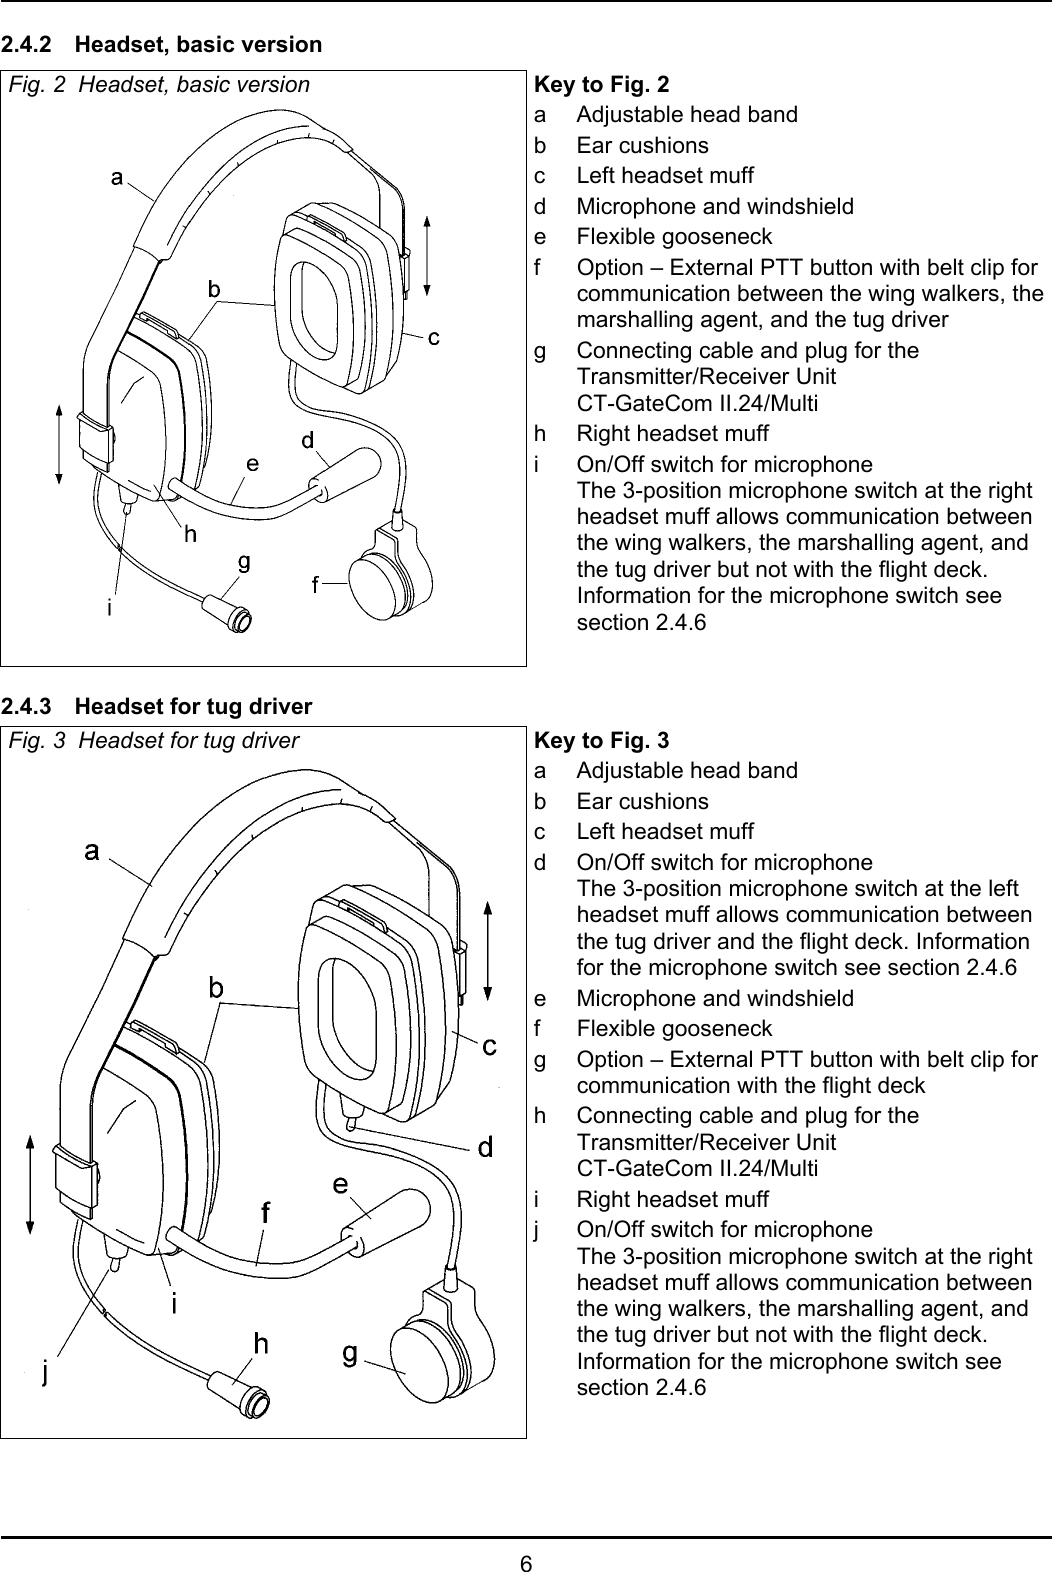 62.4.2 Headset, basic versionFig. 2  Headset, basic version Key to Fig. 2a Adjustable head bandb Ear cushionsc Left headset muffd Microphone and windshielde Flexible gooseneckf Option – External PTT button with belt clip forcommunication between the wing walkers, themarshalling agent, and the tug driverg Connecting cable and plug for theTransmitter/Receiver UnitCT-GateCom II.24/Multih Right headset muffi On/Off switch for microphoneThe 3-position microphone switch at the rightheadset muff allows communication betweenthe wing walkers, the marshalling agent, andthe tug driver but not with the flight deck.Information for the microphone switch seesection 2.4.62.4.3 Headset for tug driverFig. 3  Headset for tug driver Key to Fig. 3a Adjustable head bandb Ear cushionsc Left headset muffd On/Off switch for microphoneThe 3-position microphone switch at the leftheadset muff allows communication betweenthe tug driver and the flight deck. Informationfor the microphone switch see section 2.4.6e Microphone and windshieldf Flexible gooseneckg Option – External PTT button with belt clip forcommunication with the flight deckh Connecting cable and plug for theTransmitter/Receiver UnitCT-GateCom II.24/Multii Right headset muffj On/Off switch for microphoneThe 3-position microphone switch at the rightheadset muff allows communication betweenthe wing walkers, the marshalling agent, andthe tug driver but not with the flight deck.Information for the microphone switch seesection 2.4.6